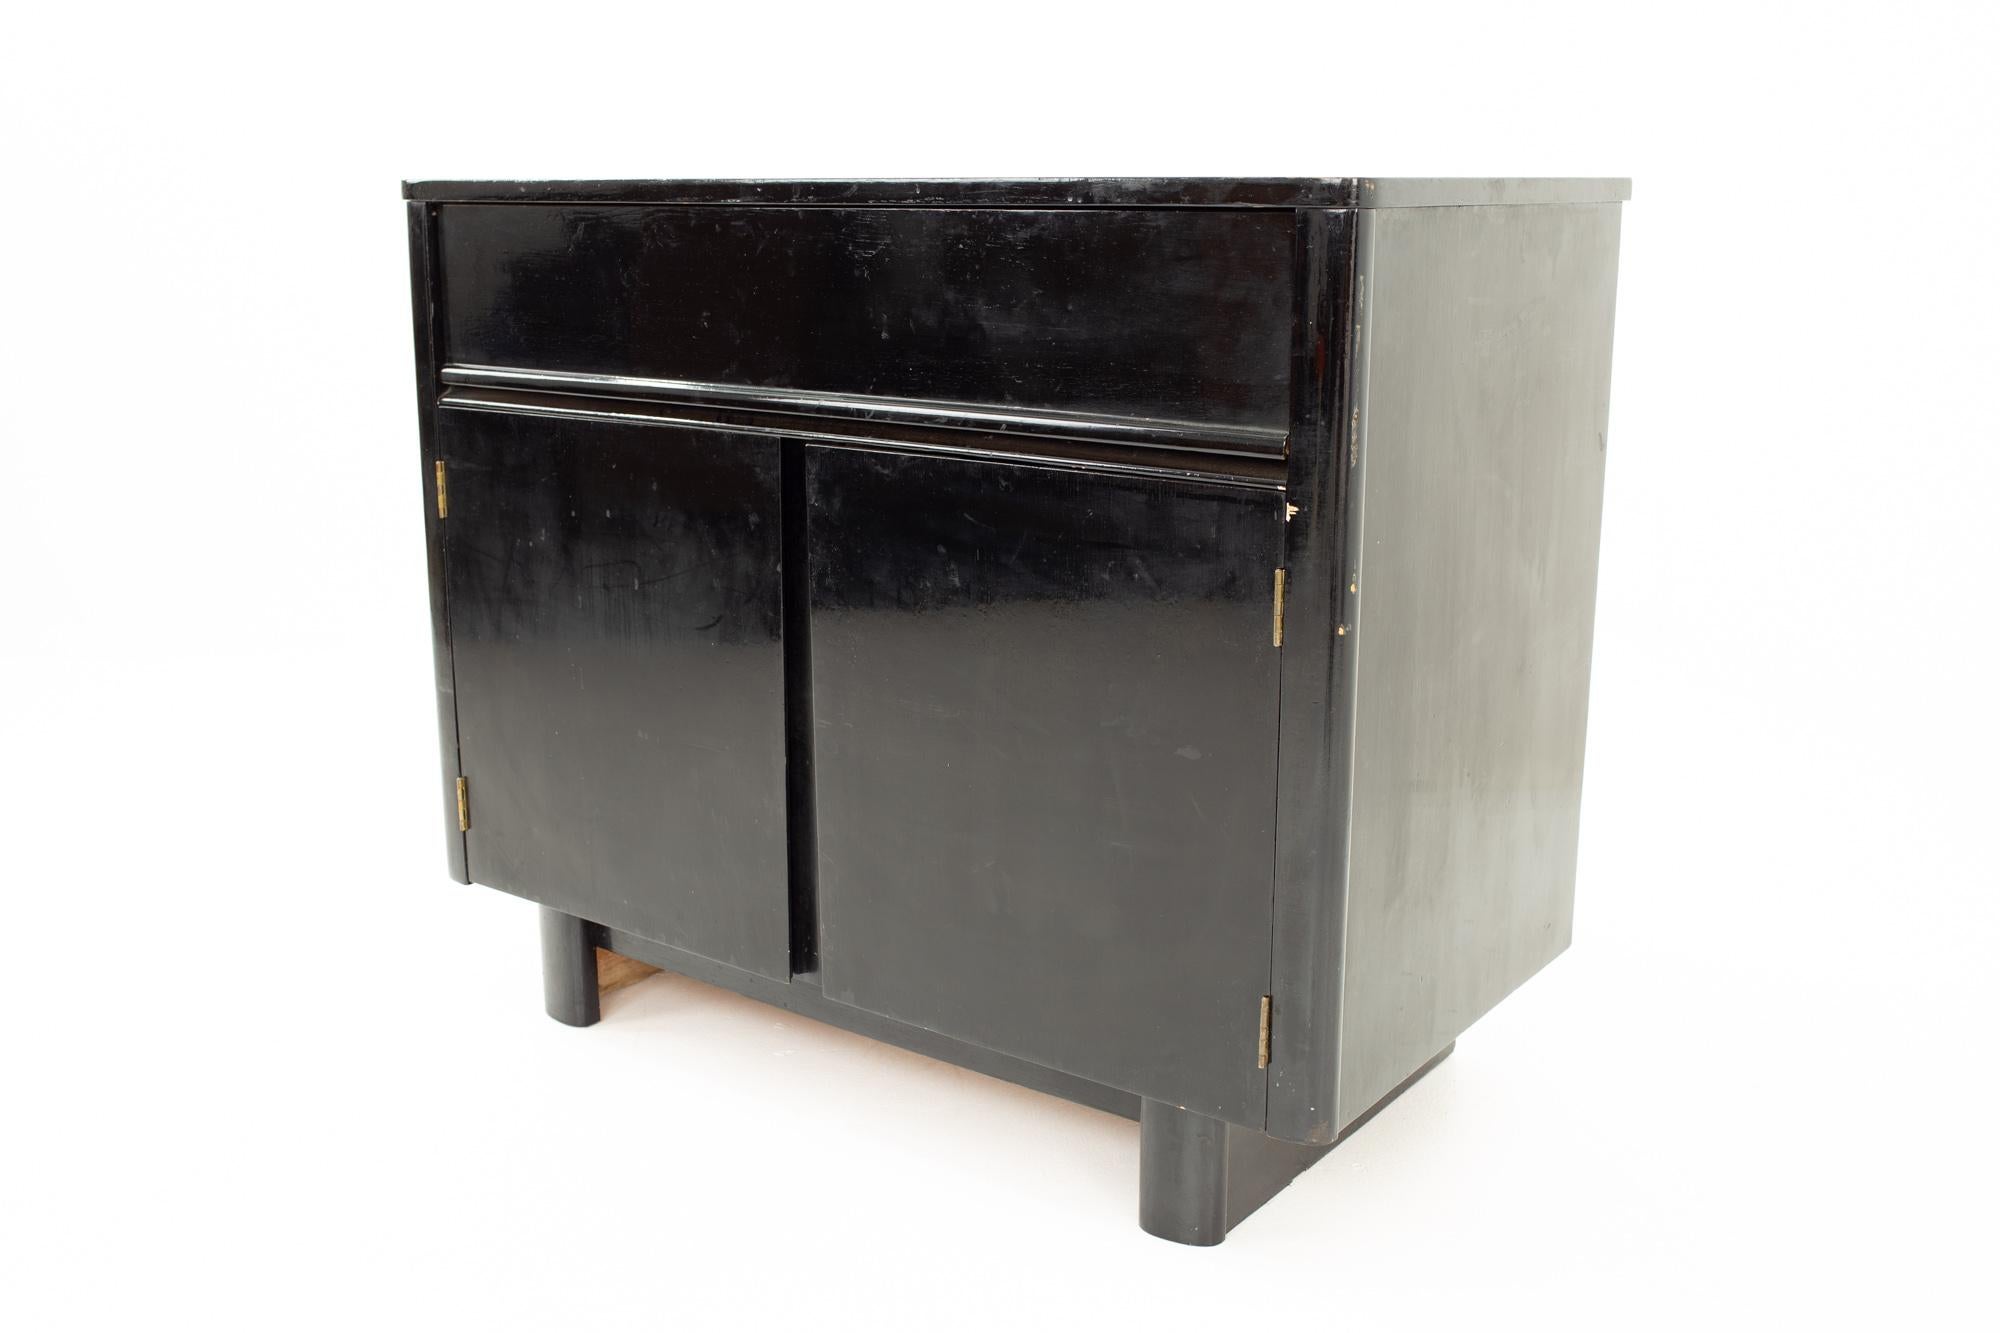 Mid century black lacquer cabinet
Cabinet measures: 38.5 wide x 19 deep x 31 high

All pieces of furniture can be had in what we call restored vintage condition. That means the piece is restored upon purchase so it’s free of watermarks, chips or